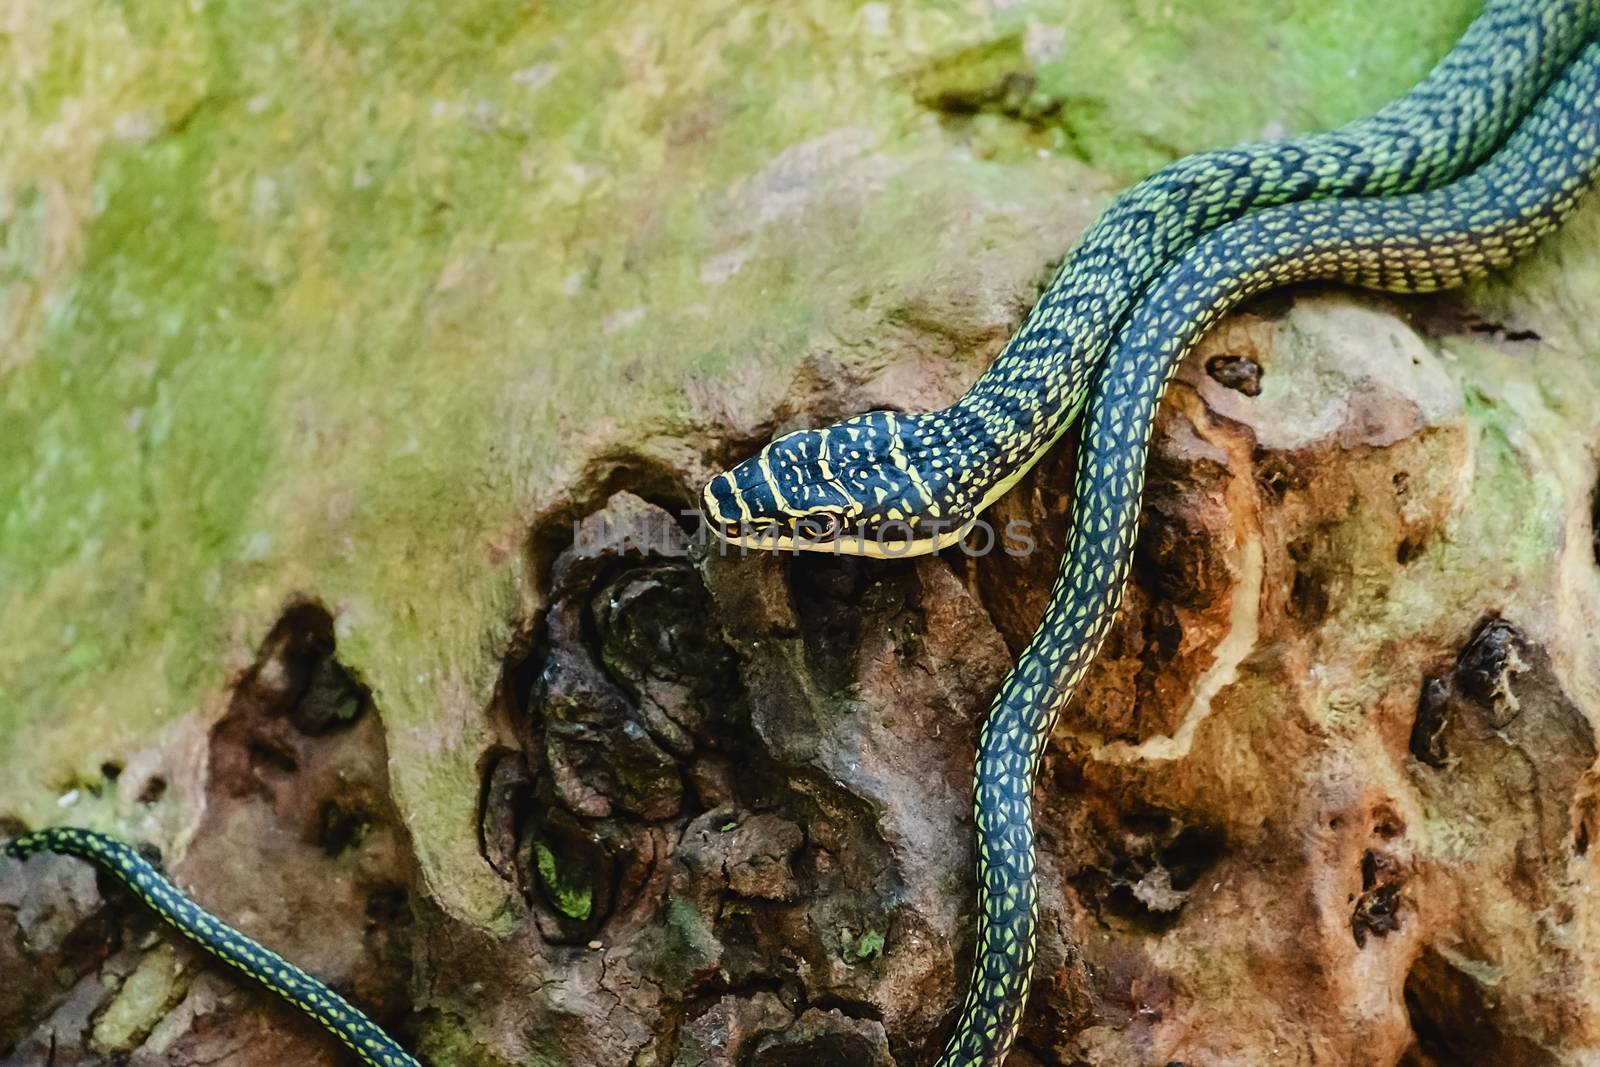 Green snake in the nature for animal and wildlife concept